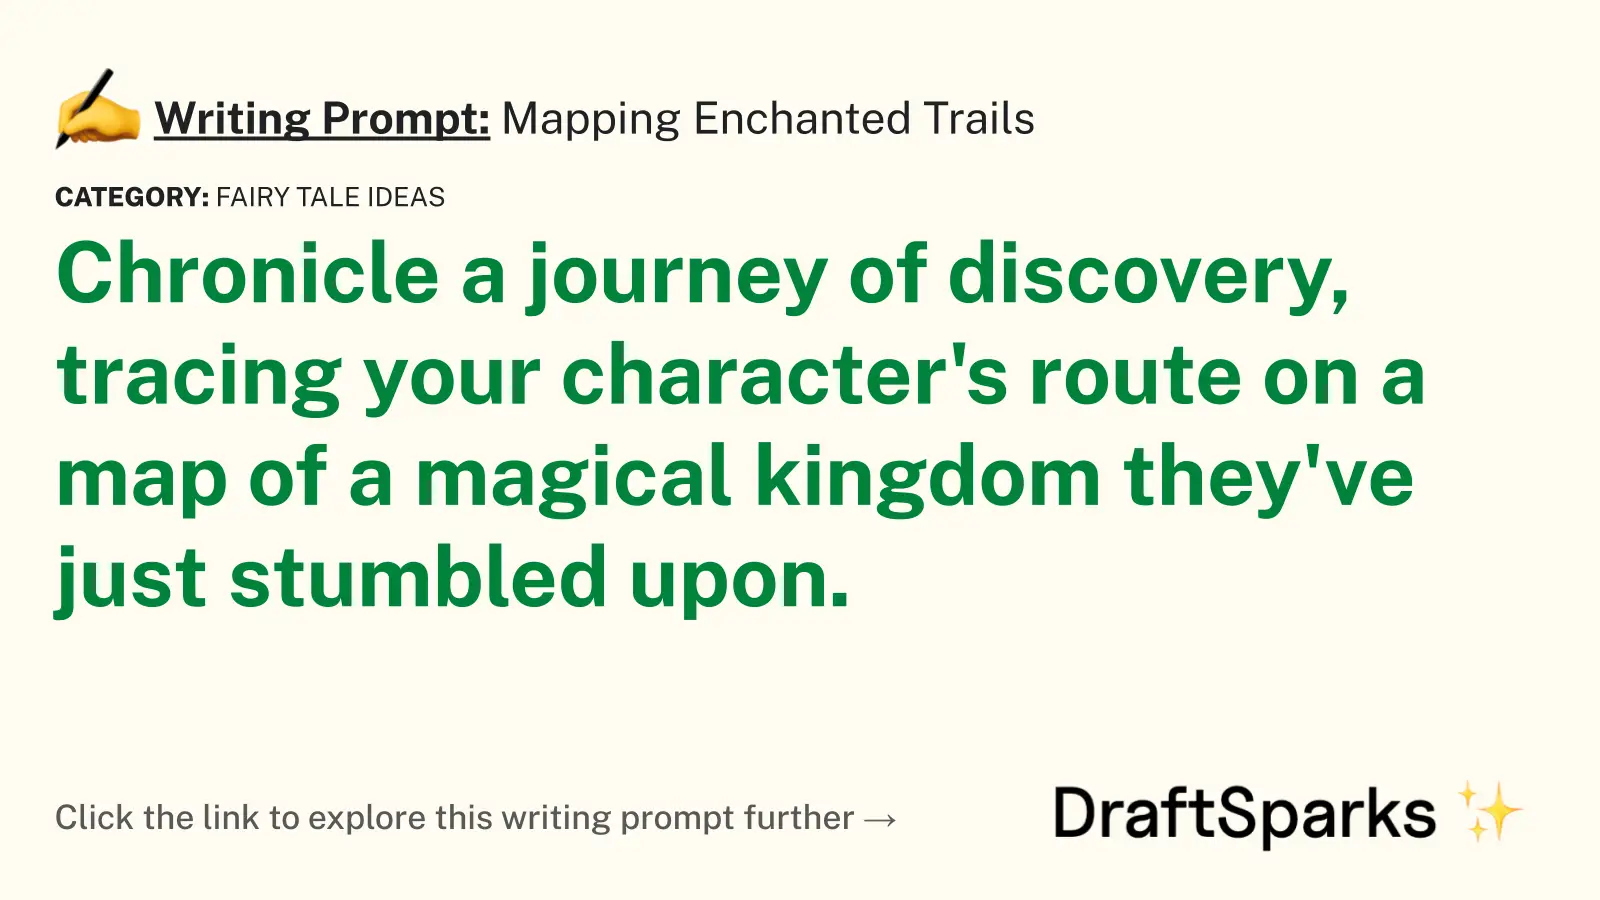 Mapping Enchanted Trails